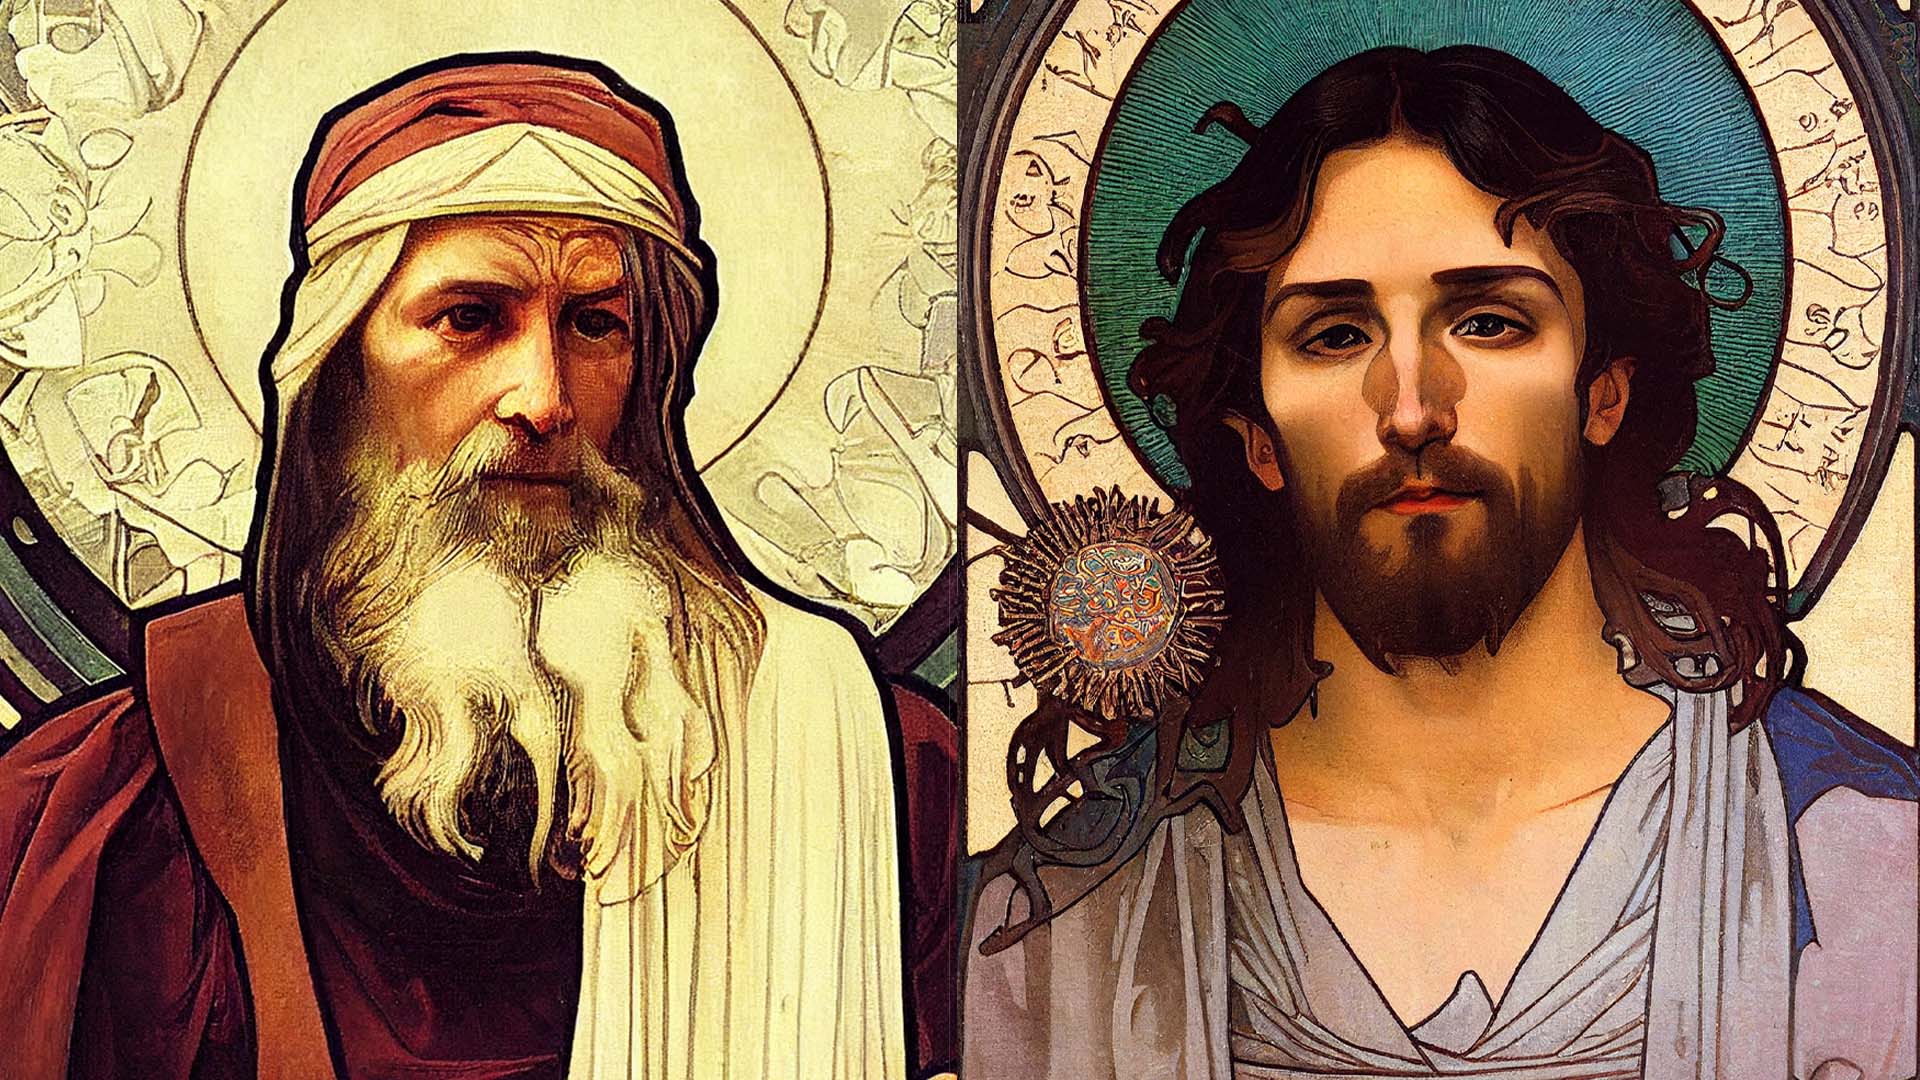 Portrait of Isaiah and Jesus Christ. Images generated by Midjourney.